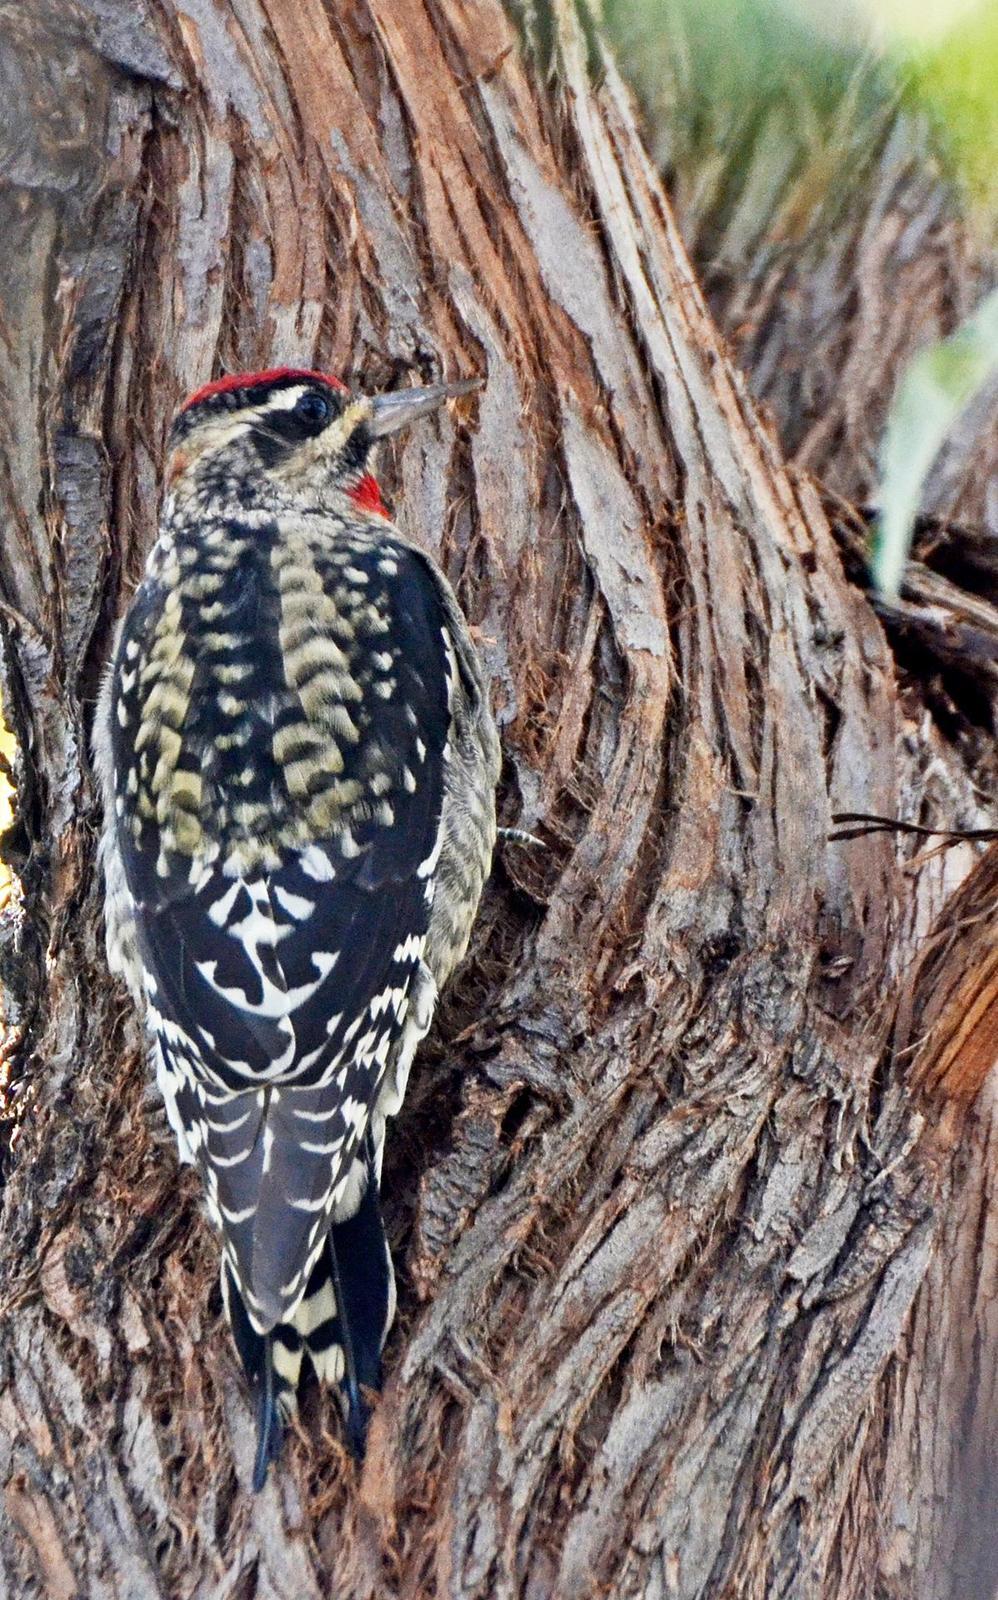 Yellow-bellied x Red-naped Sapsucker (hybrid) Photo by Steven Mlodinow